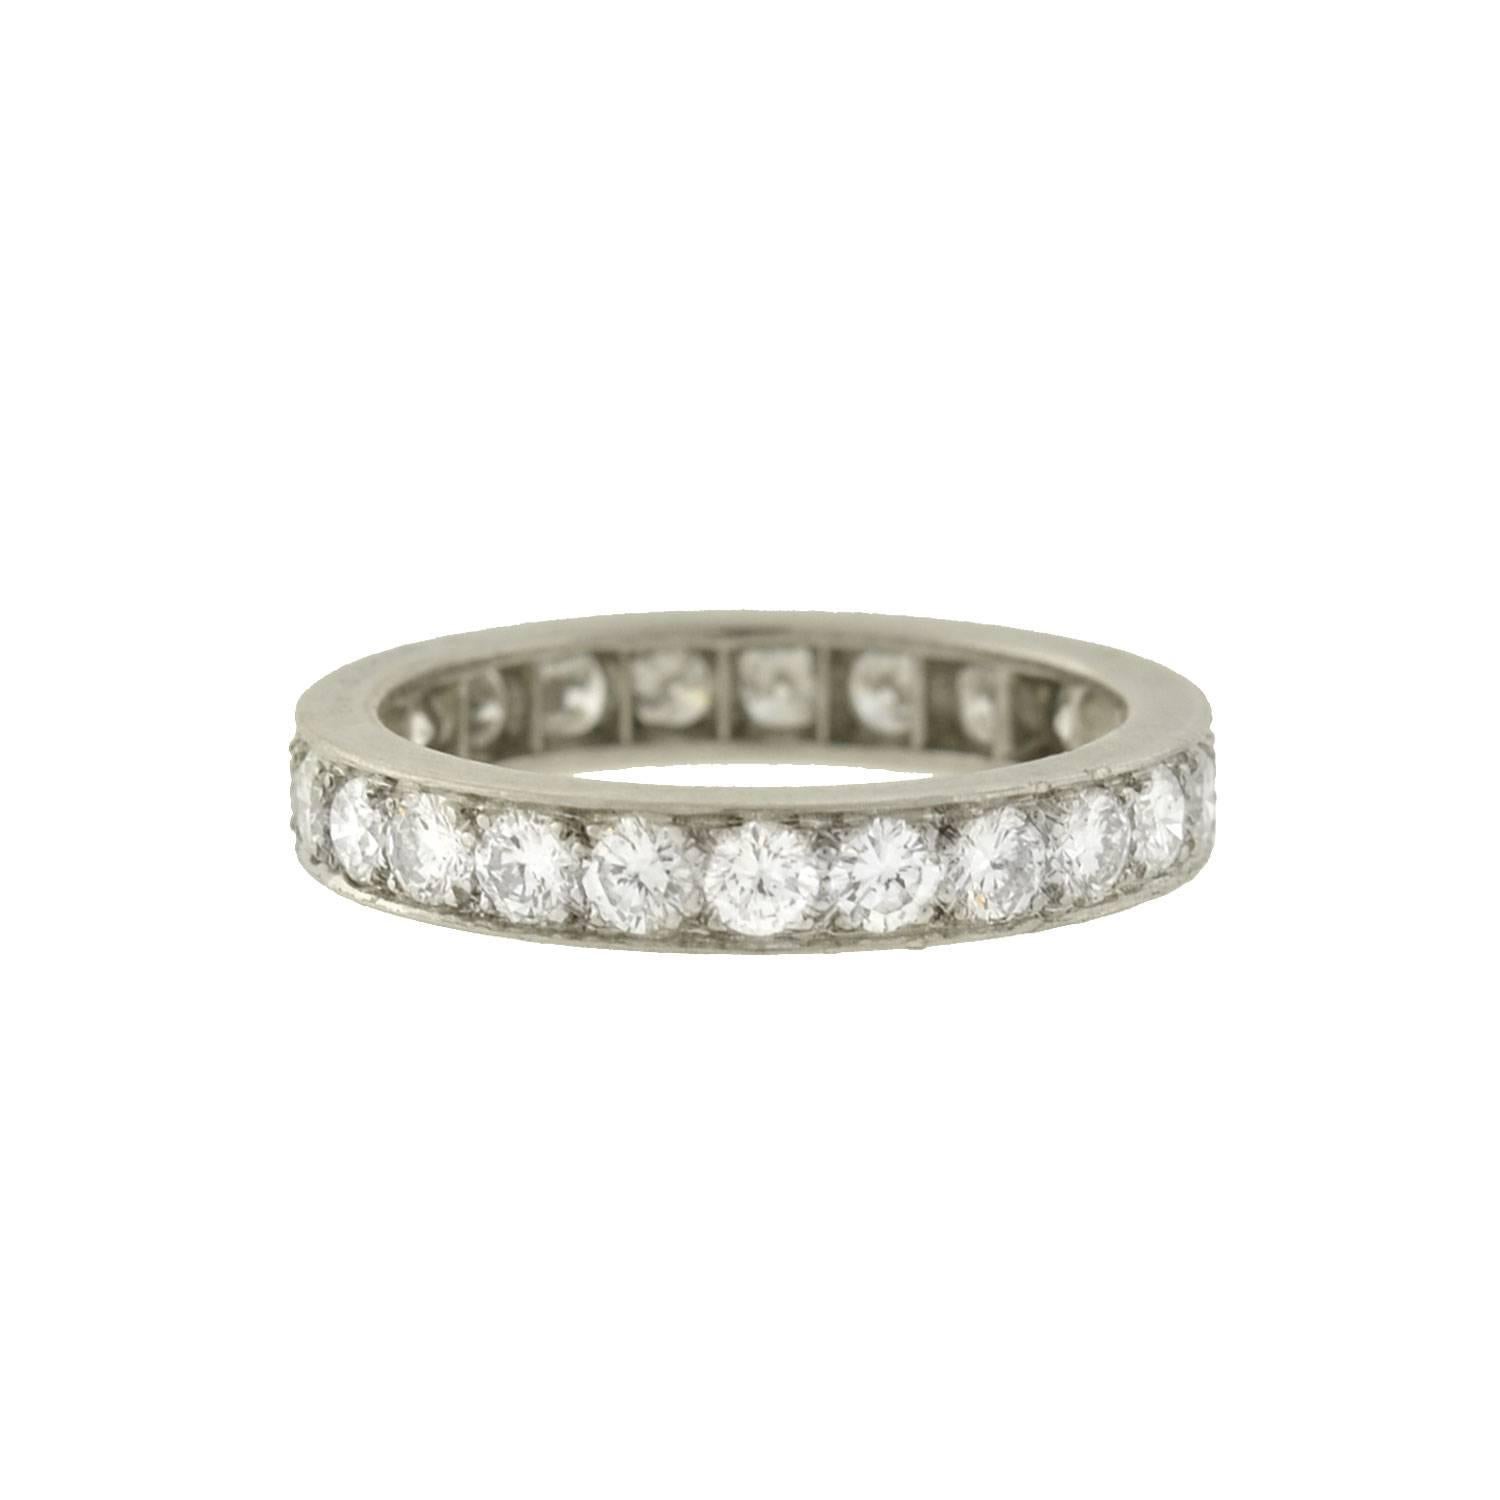 A gorgeous diamond eternity band from the Art Deco (ca1920) era! This beautiful ring is crafted in platinum, and has a design that is both elegant and timeless. A row of old European Cut diamonds carry seamlessly around the band's surface, sparkling